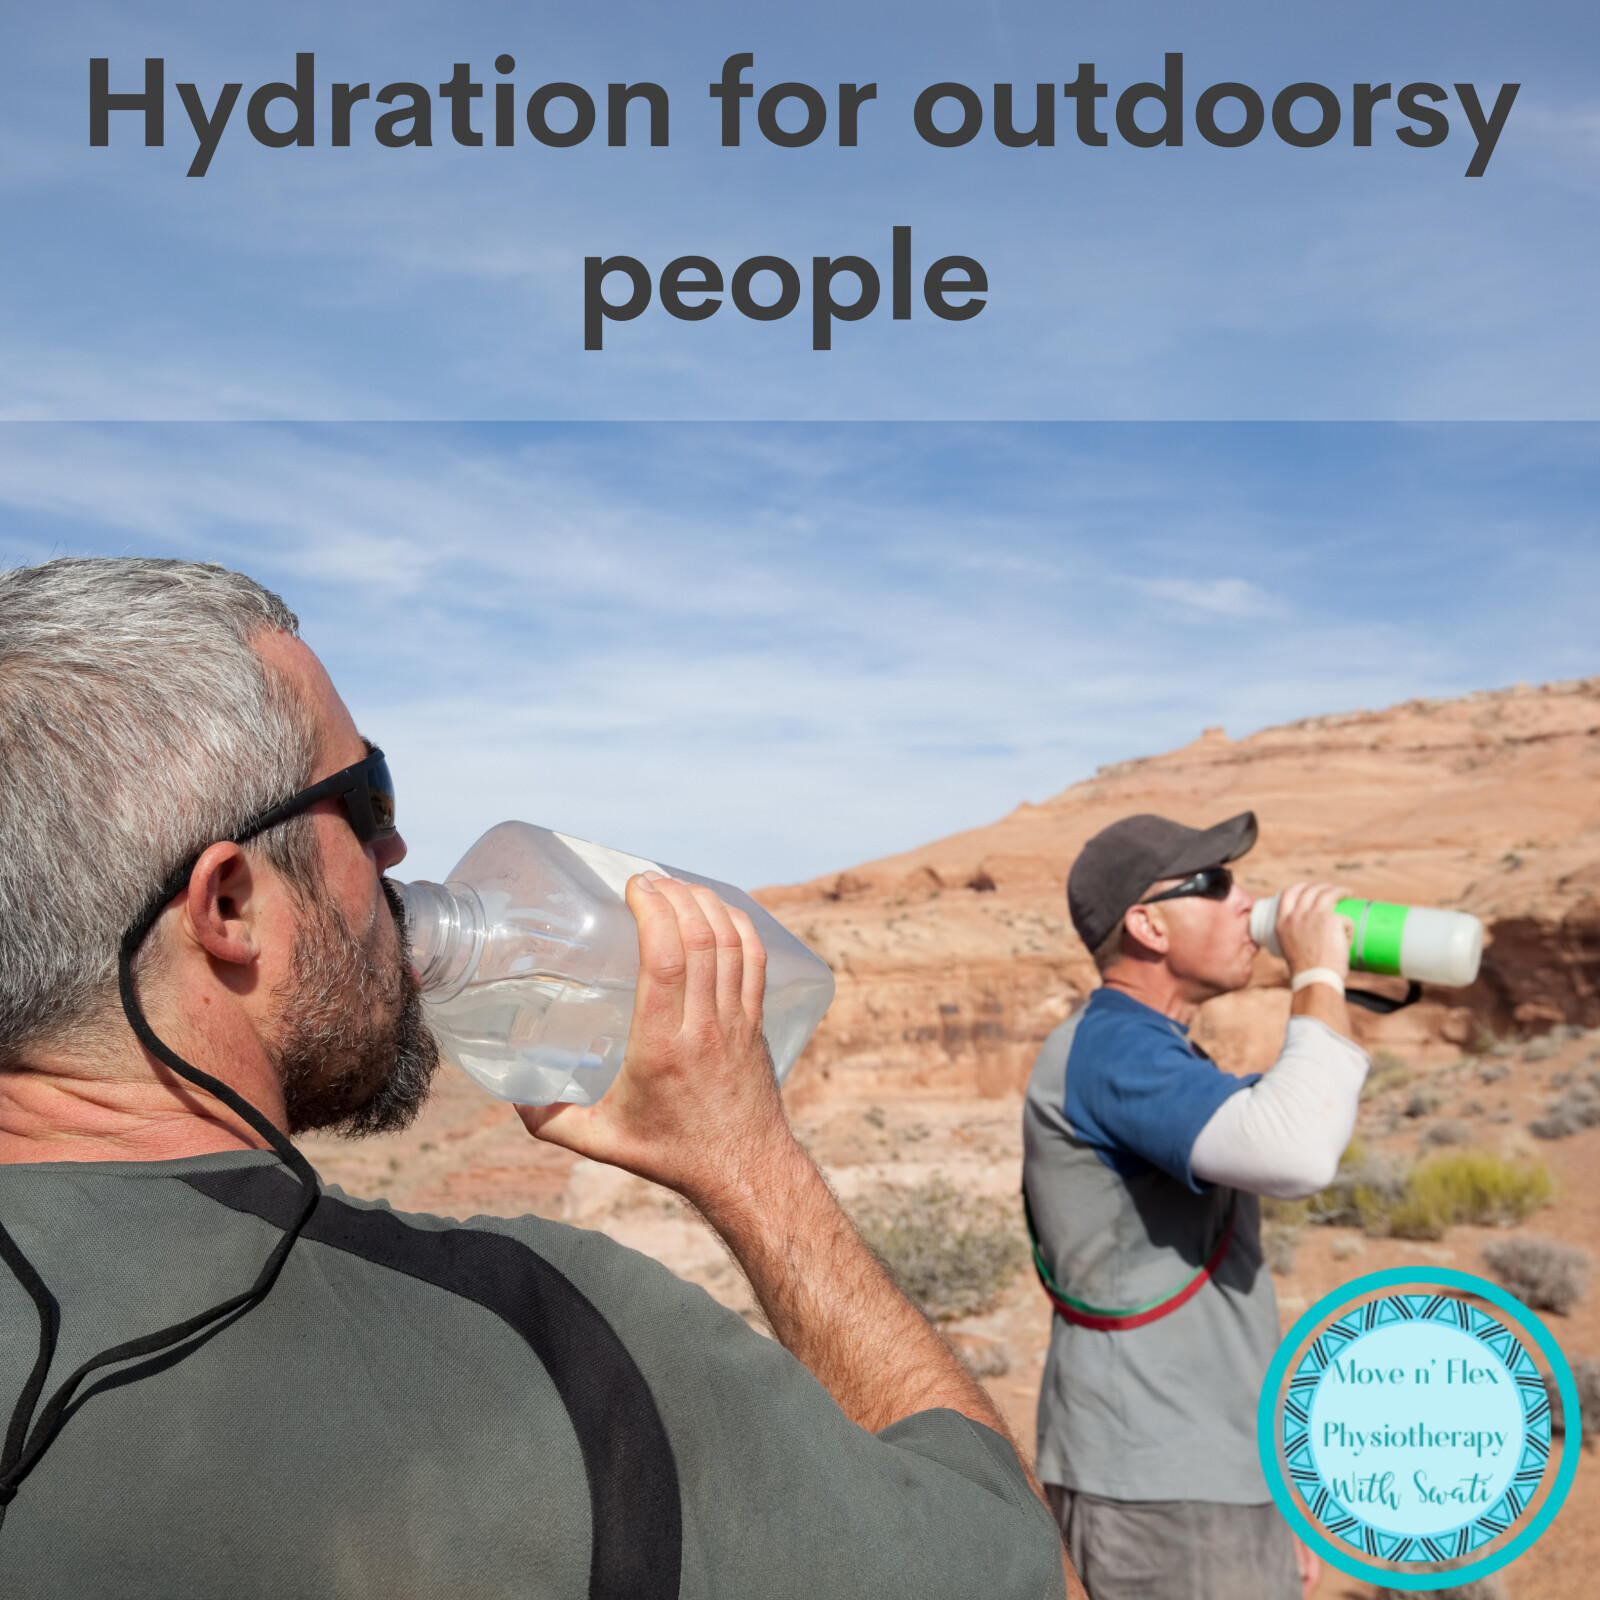 Important points when considering hydration for outdoorsy people 